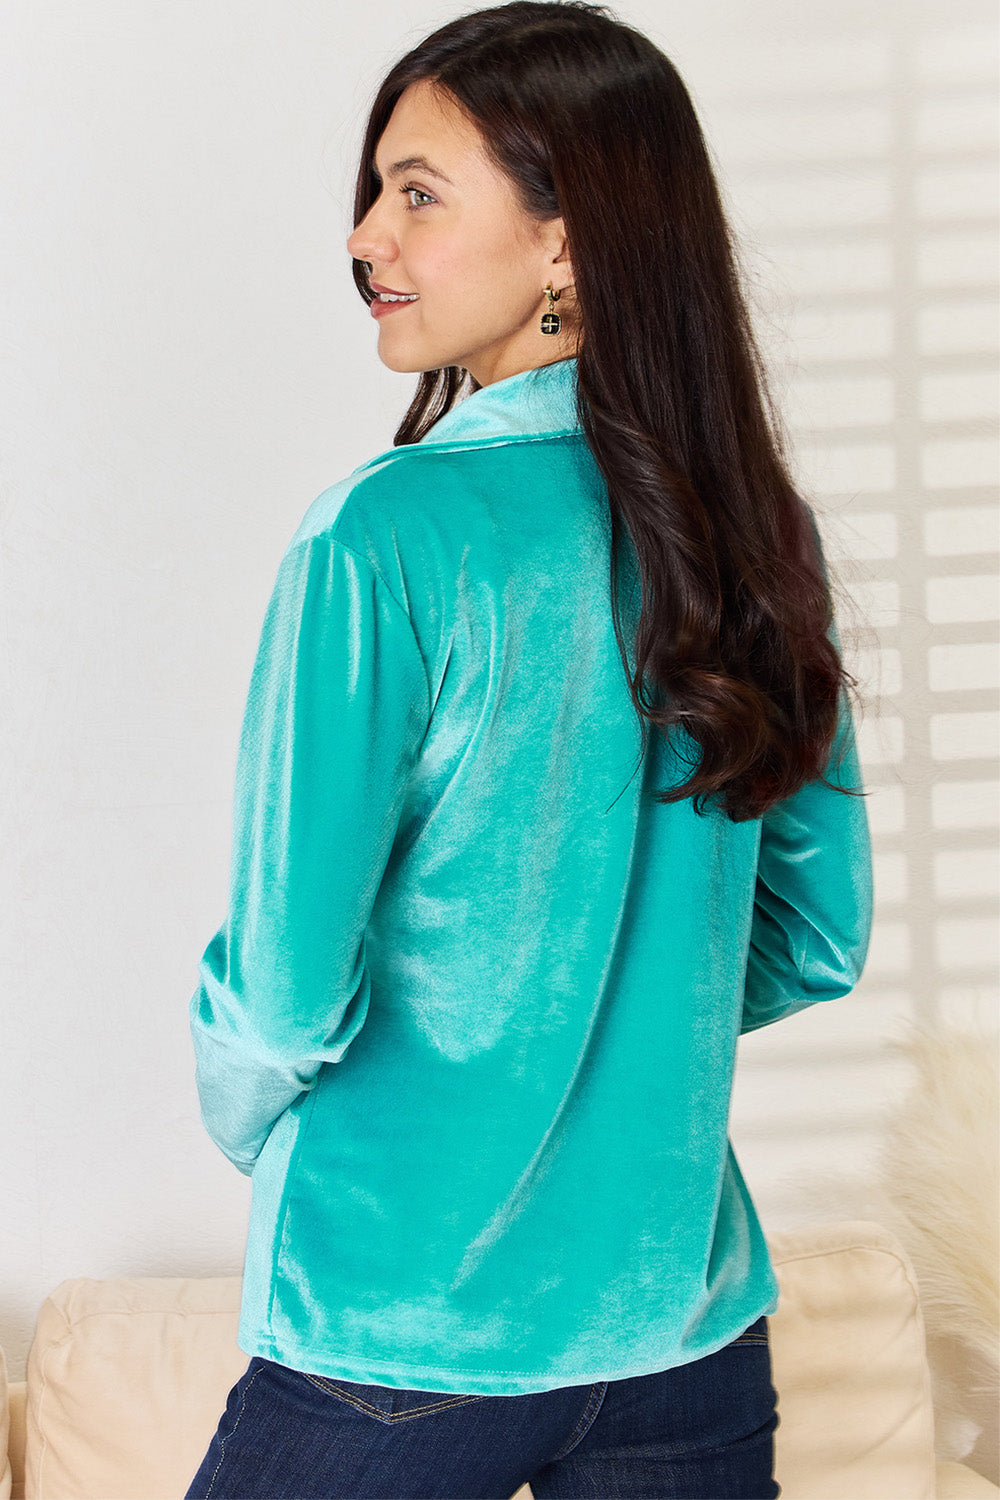 Pocketed Button Up Long Sleeve Shirt - Thandynie